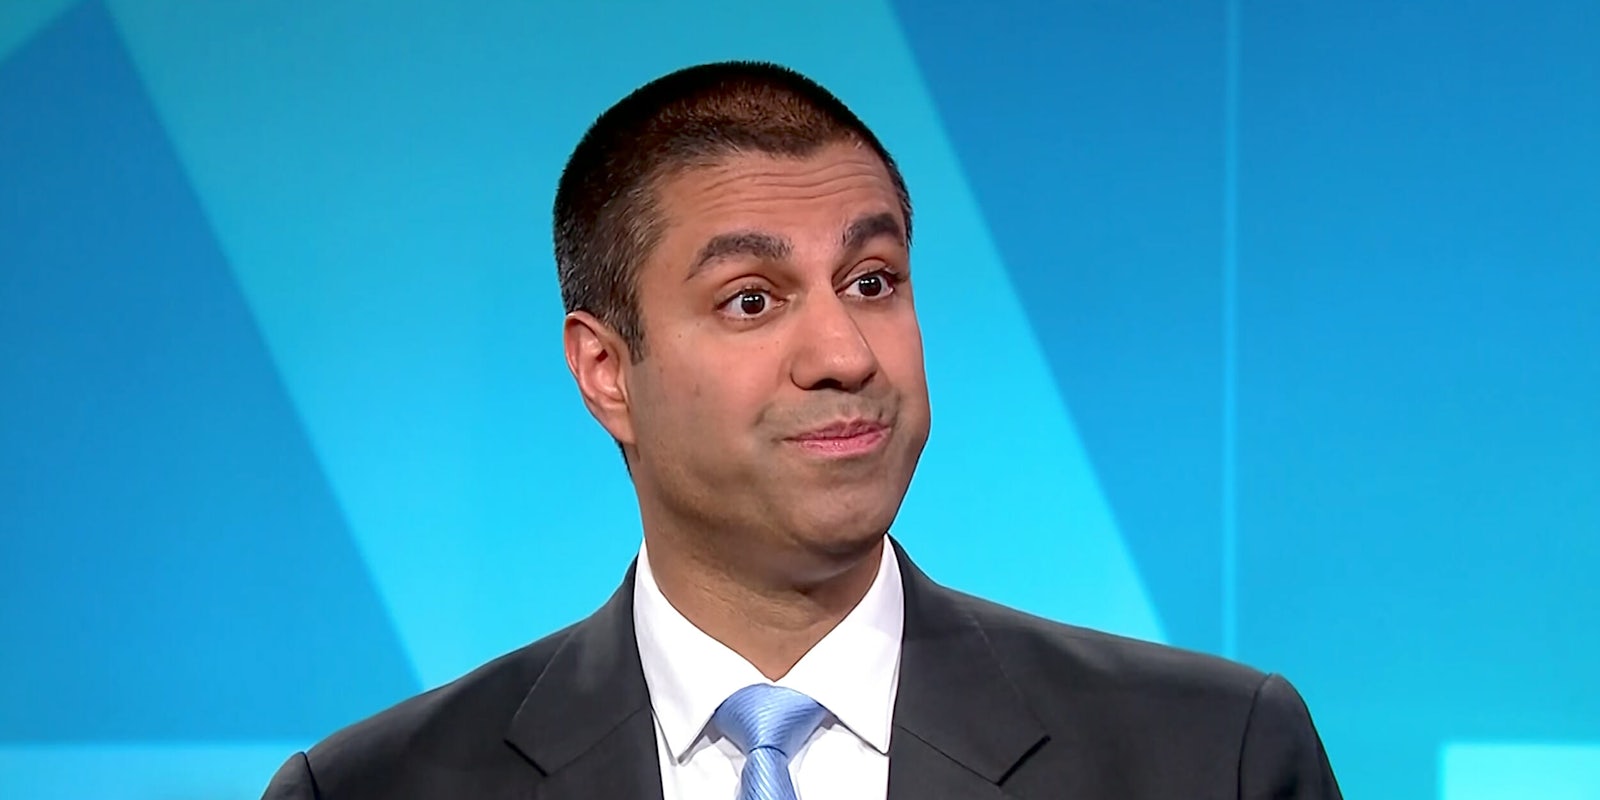 We fact-checked FCC commissioner Ajit Pai's 'facts' on net neutrality